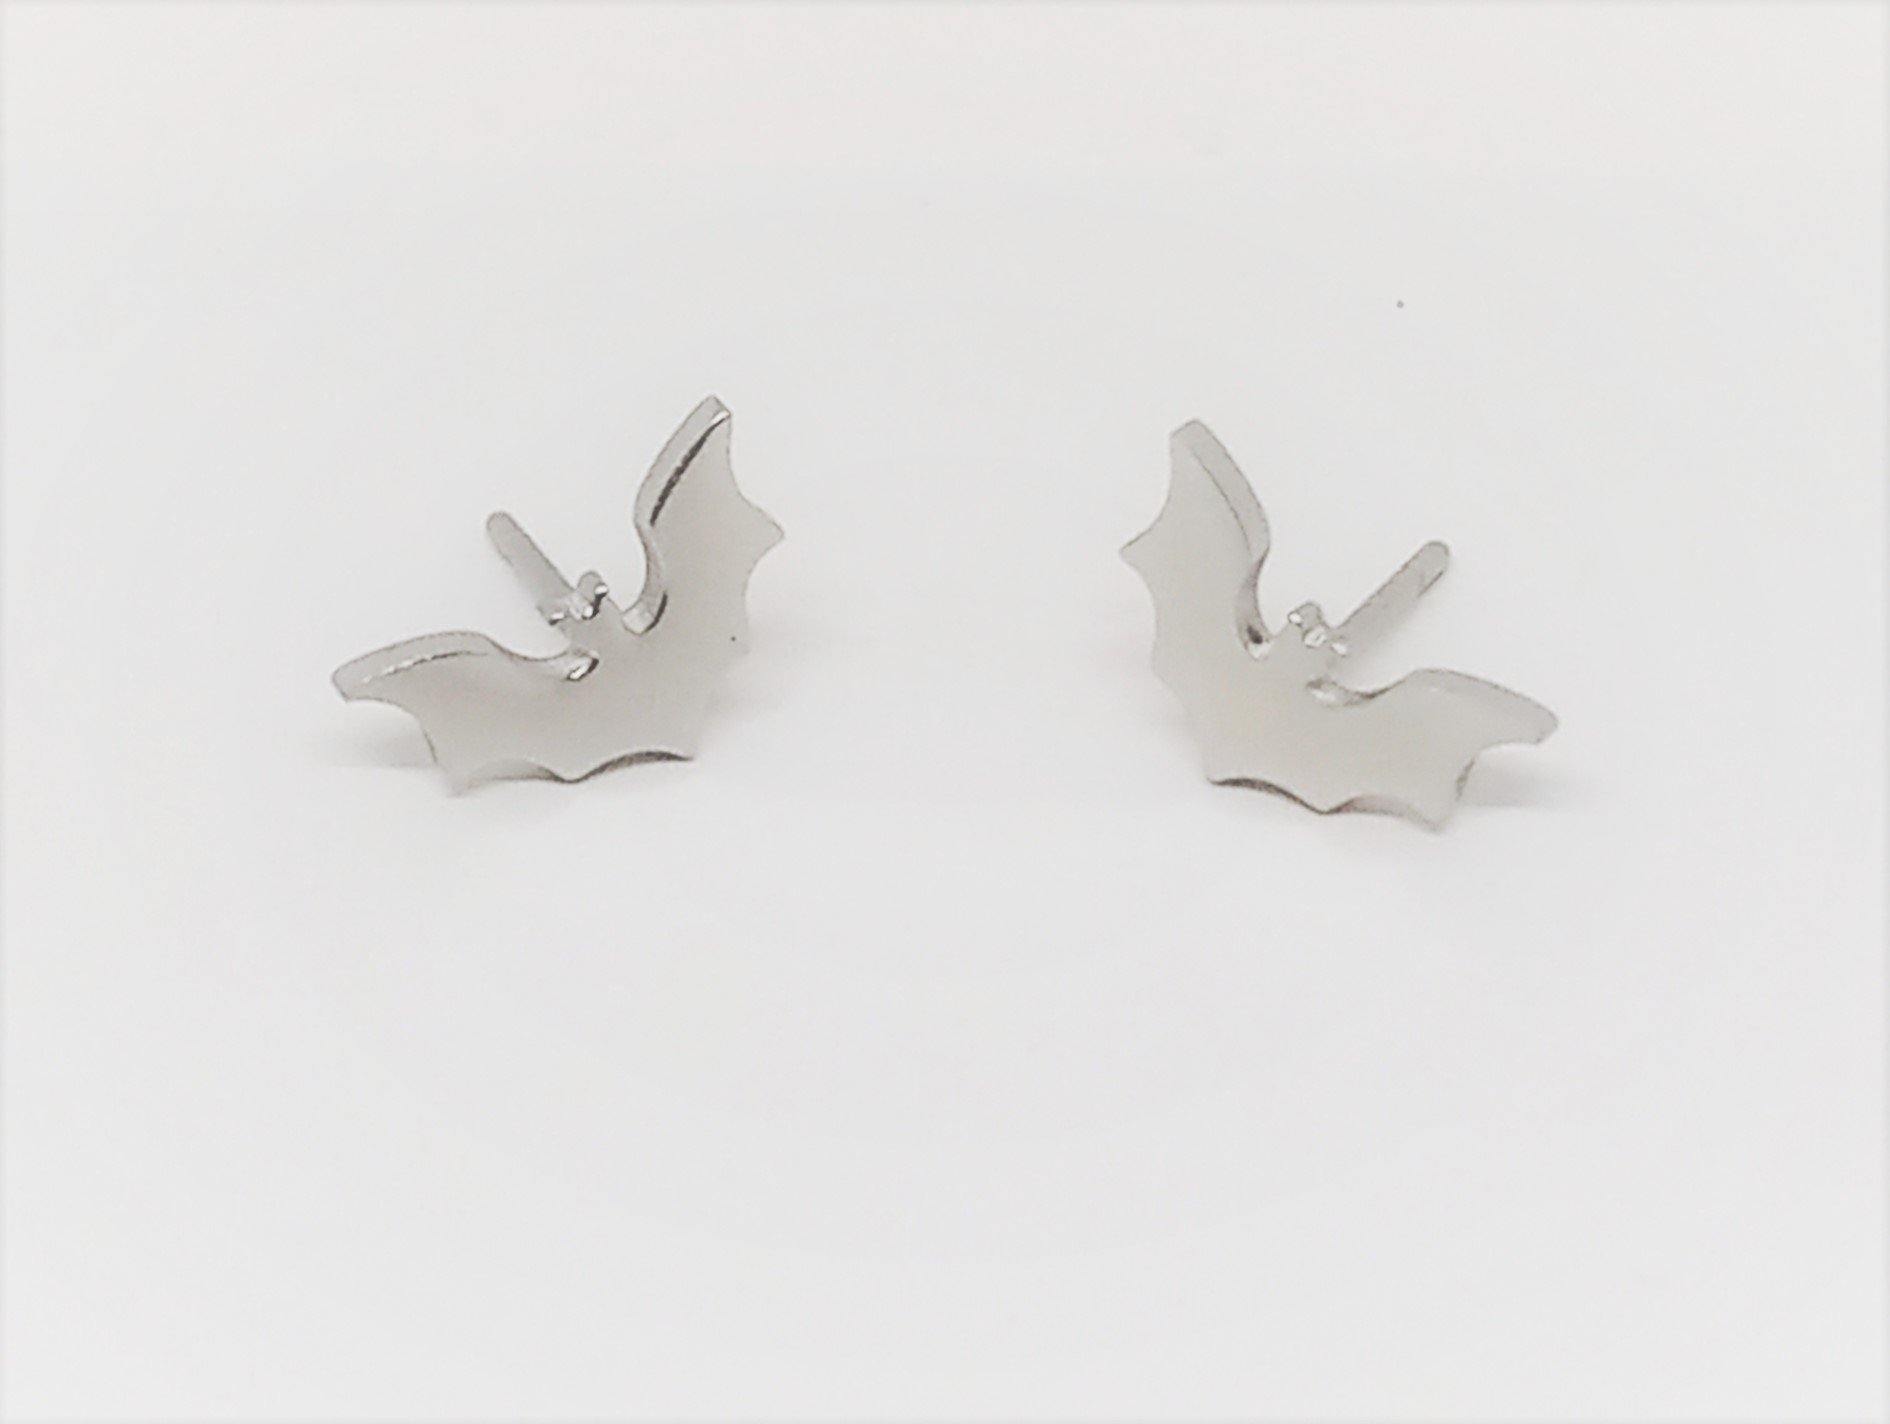 Stainless Steel Small Bat Stud Earrings Nickel Free Hypoallergenic Silver or Black - Guiding Lights Boutique